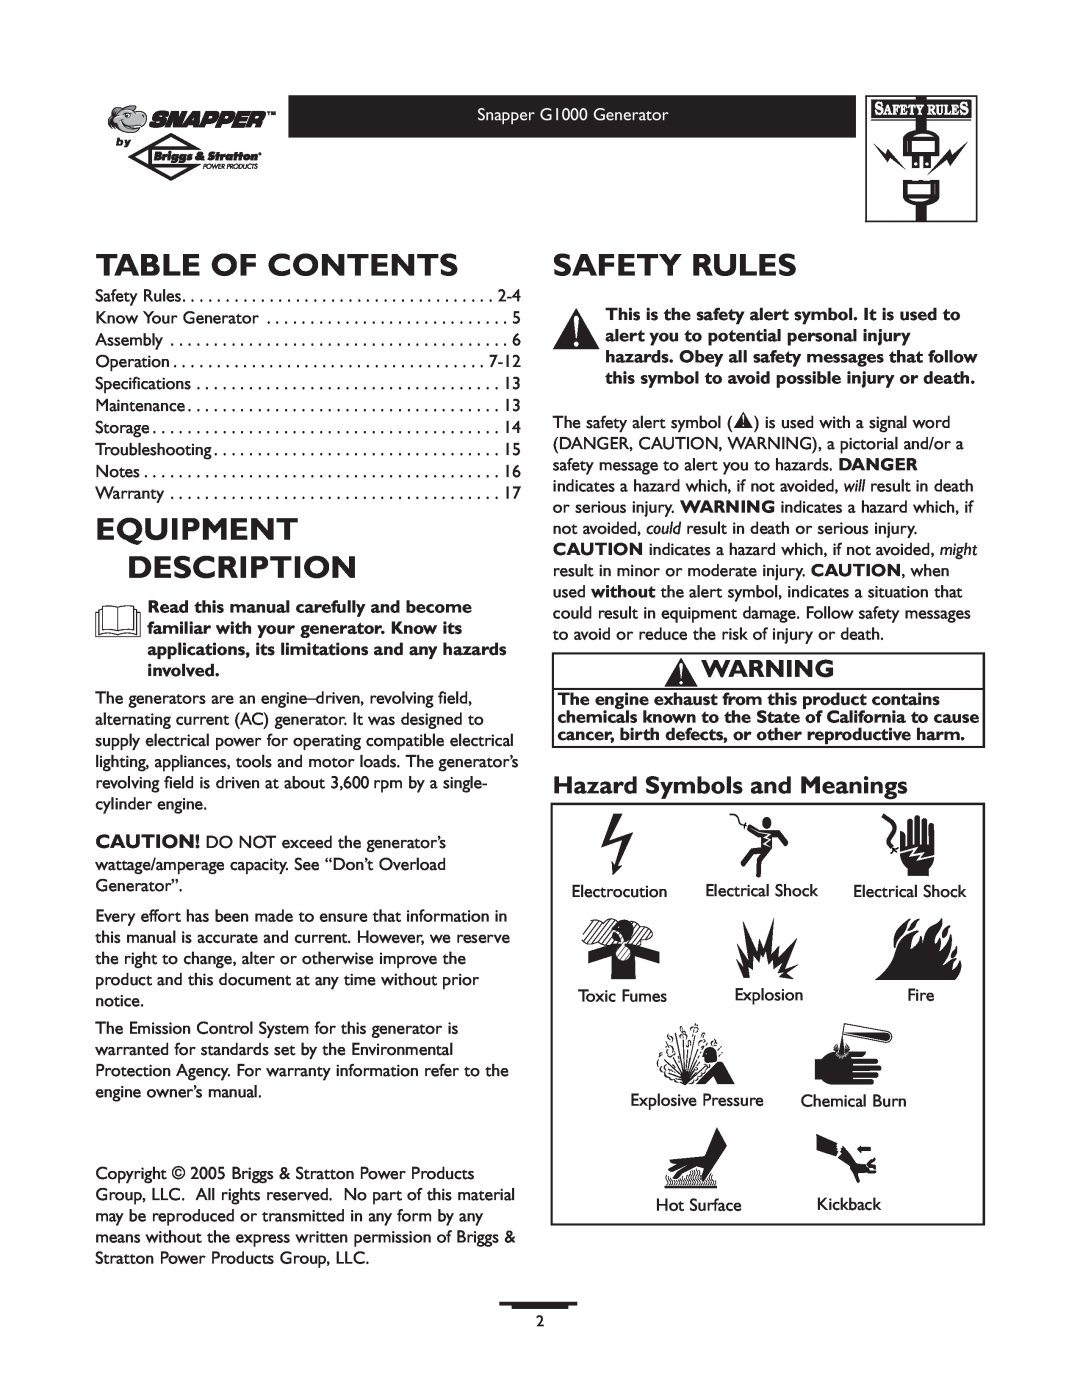 Snapper Table Of Contents, Equipment Description, Safety Rules, Hazard Symbols and Meanings, Snapper G1000 Generator 